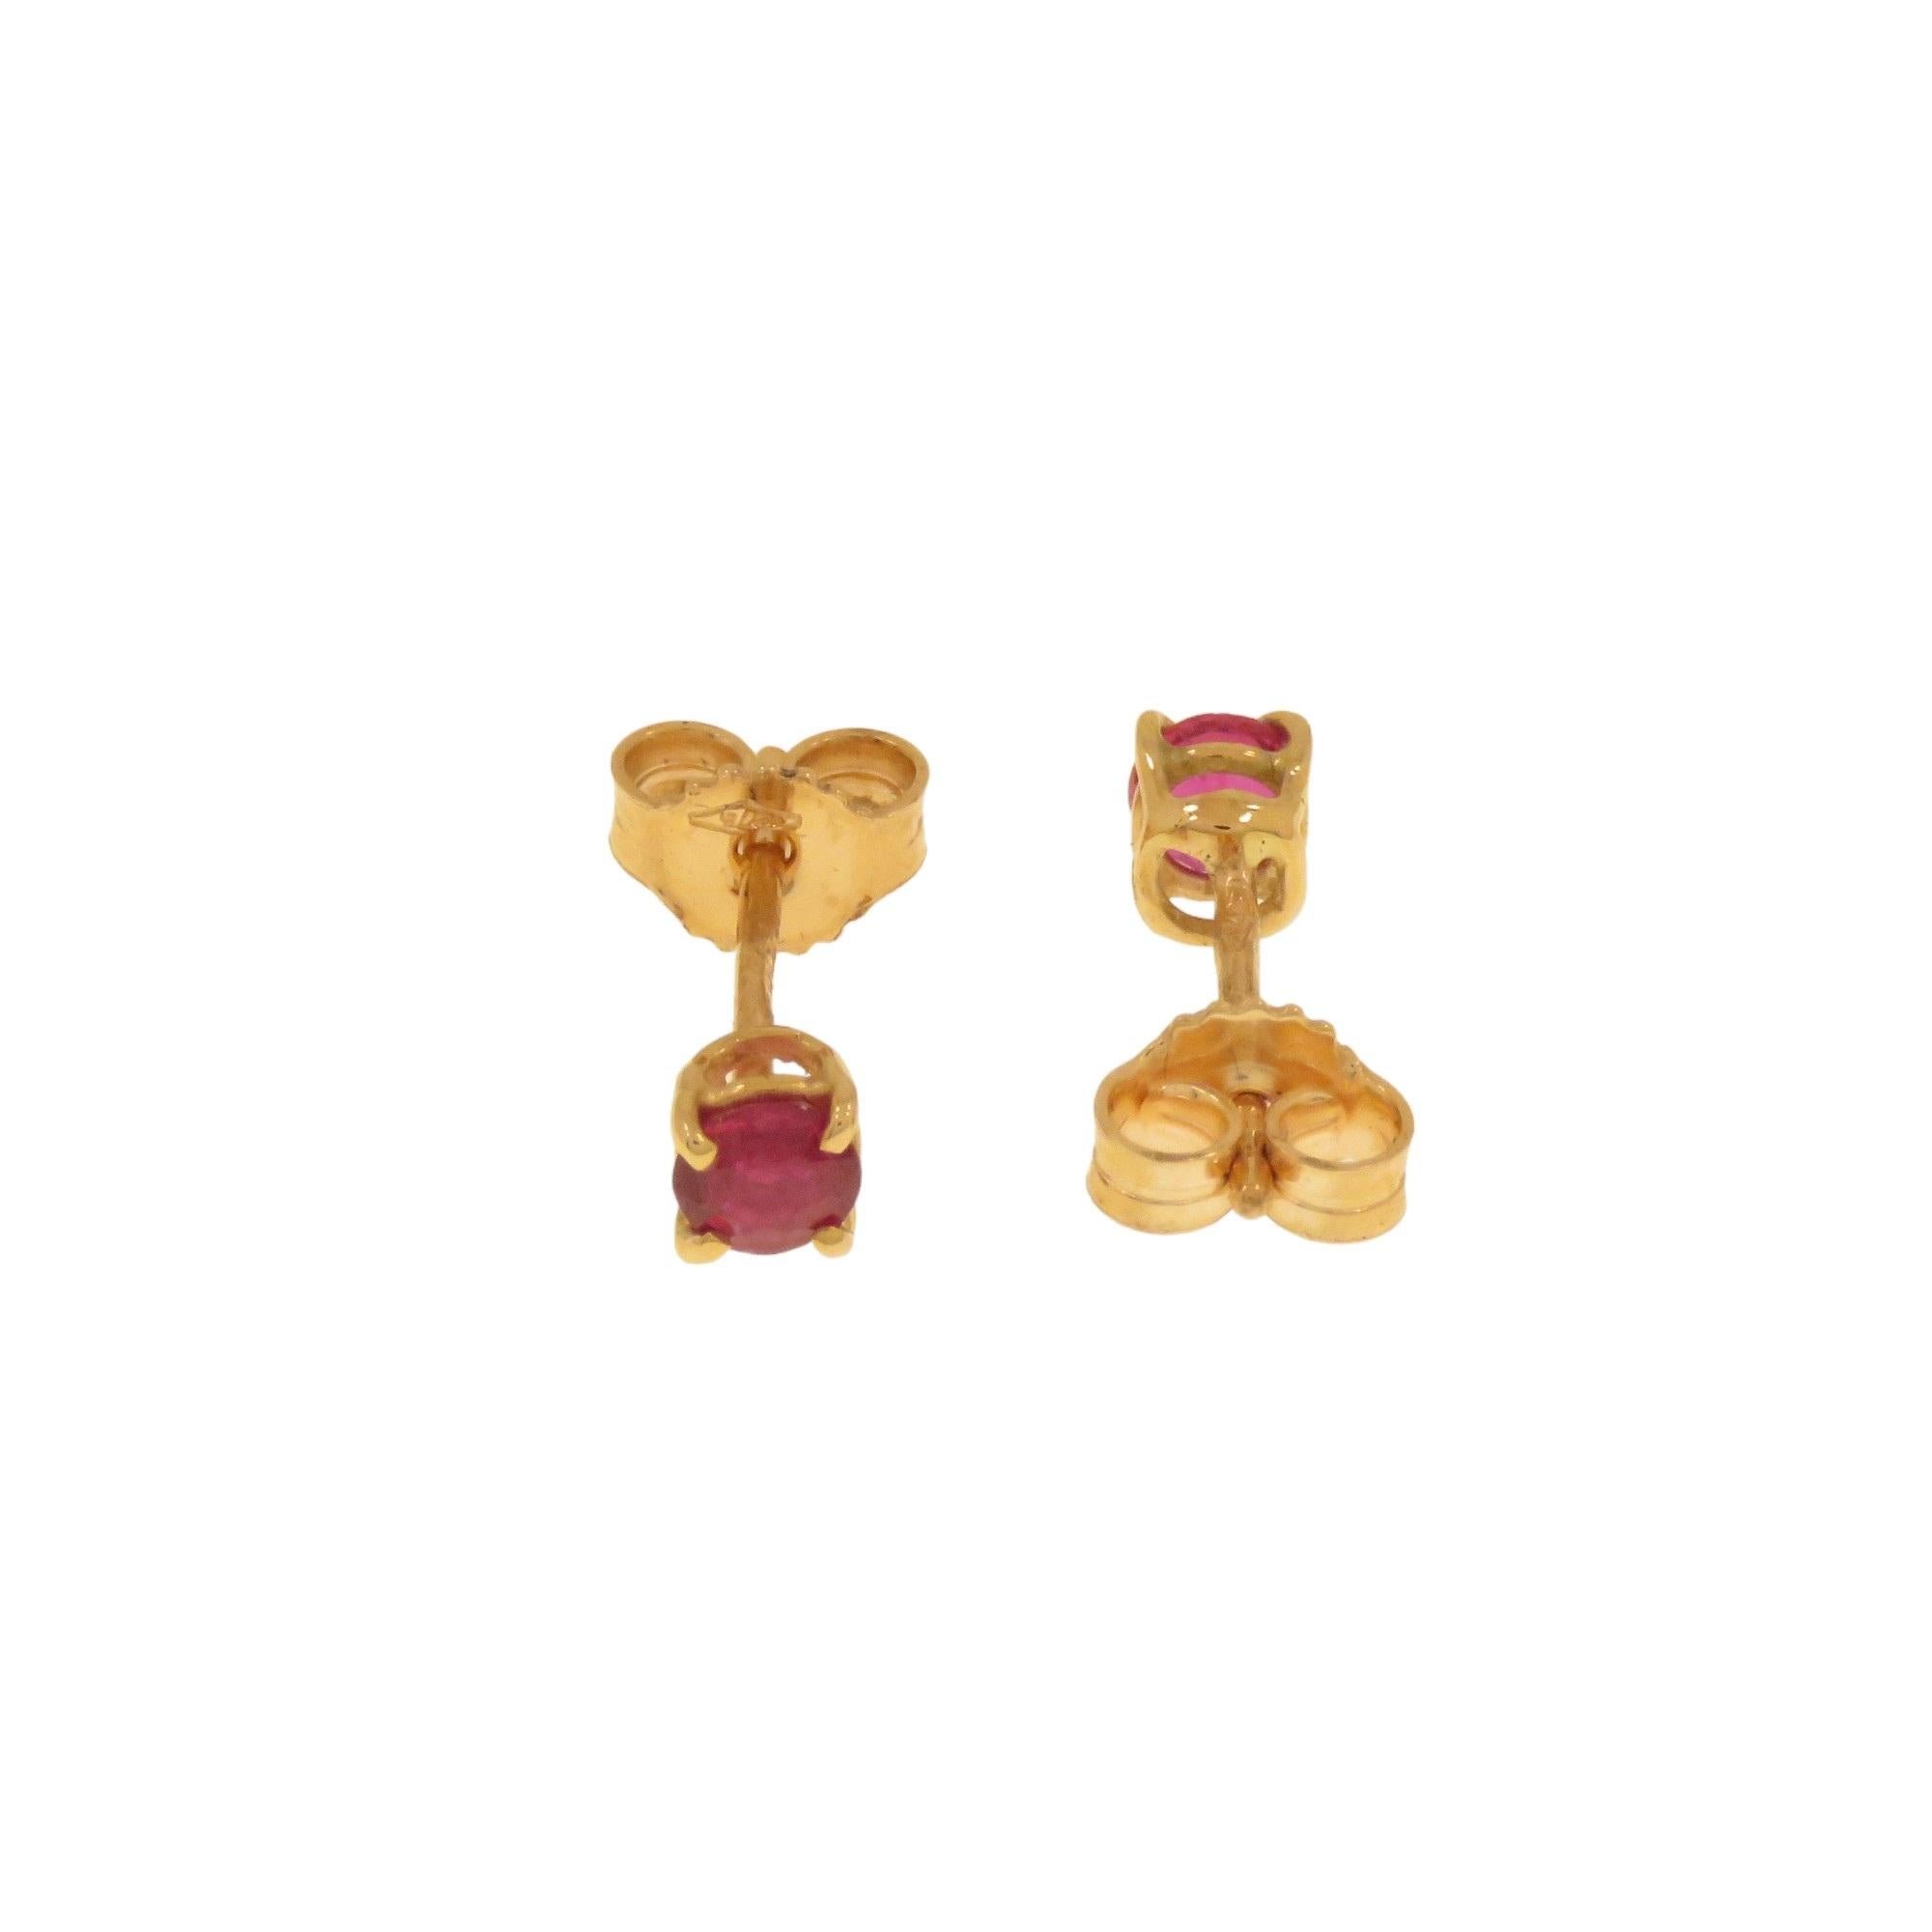 Minimal earrings made by Botta Gioielli in Milan in 9k rose gold with two 4 mm / 0.157 inches brilliant-cut rubies totaling 0.40 ct. The stones are set in a jaw bezel with gallery. The earrings have a butterfly clasp. The total weight of the